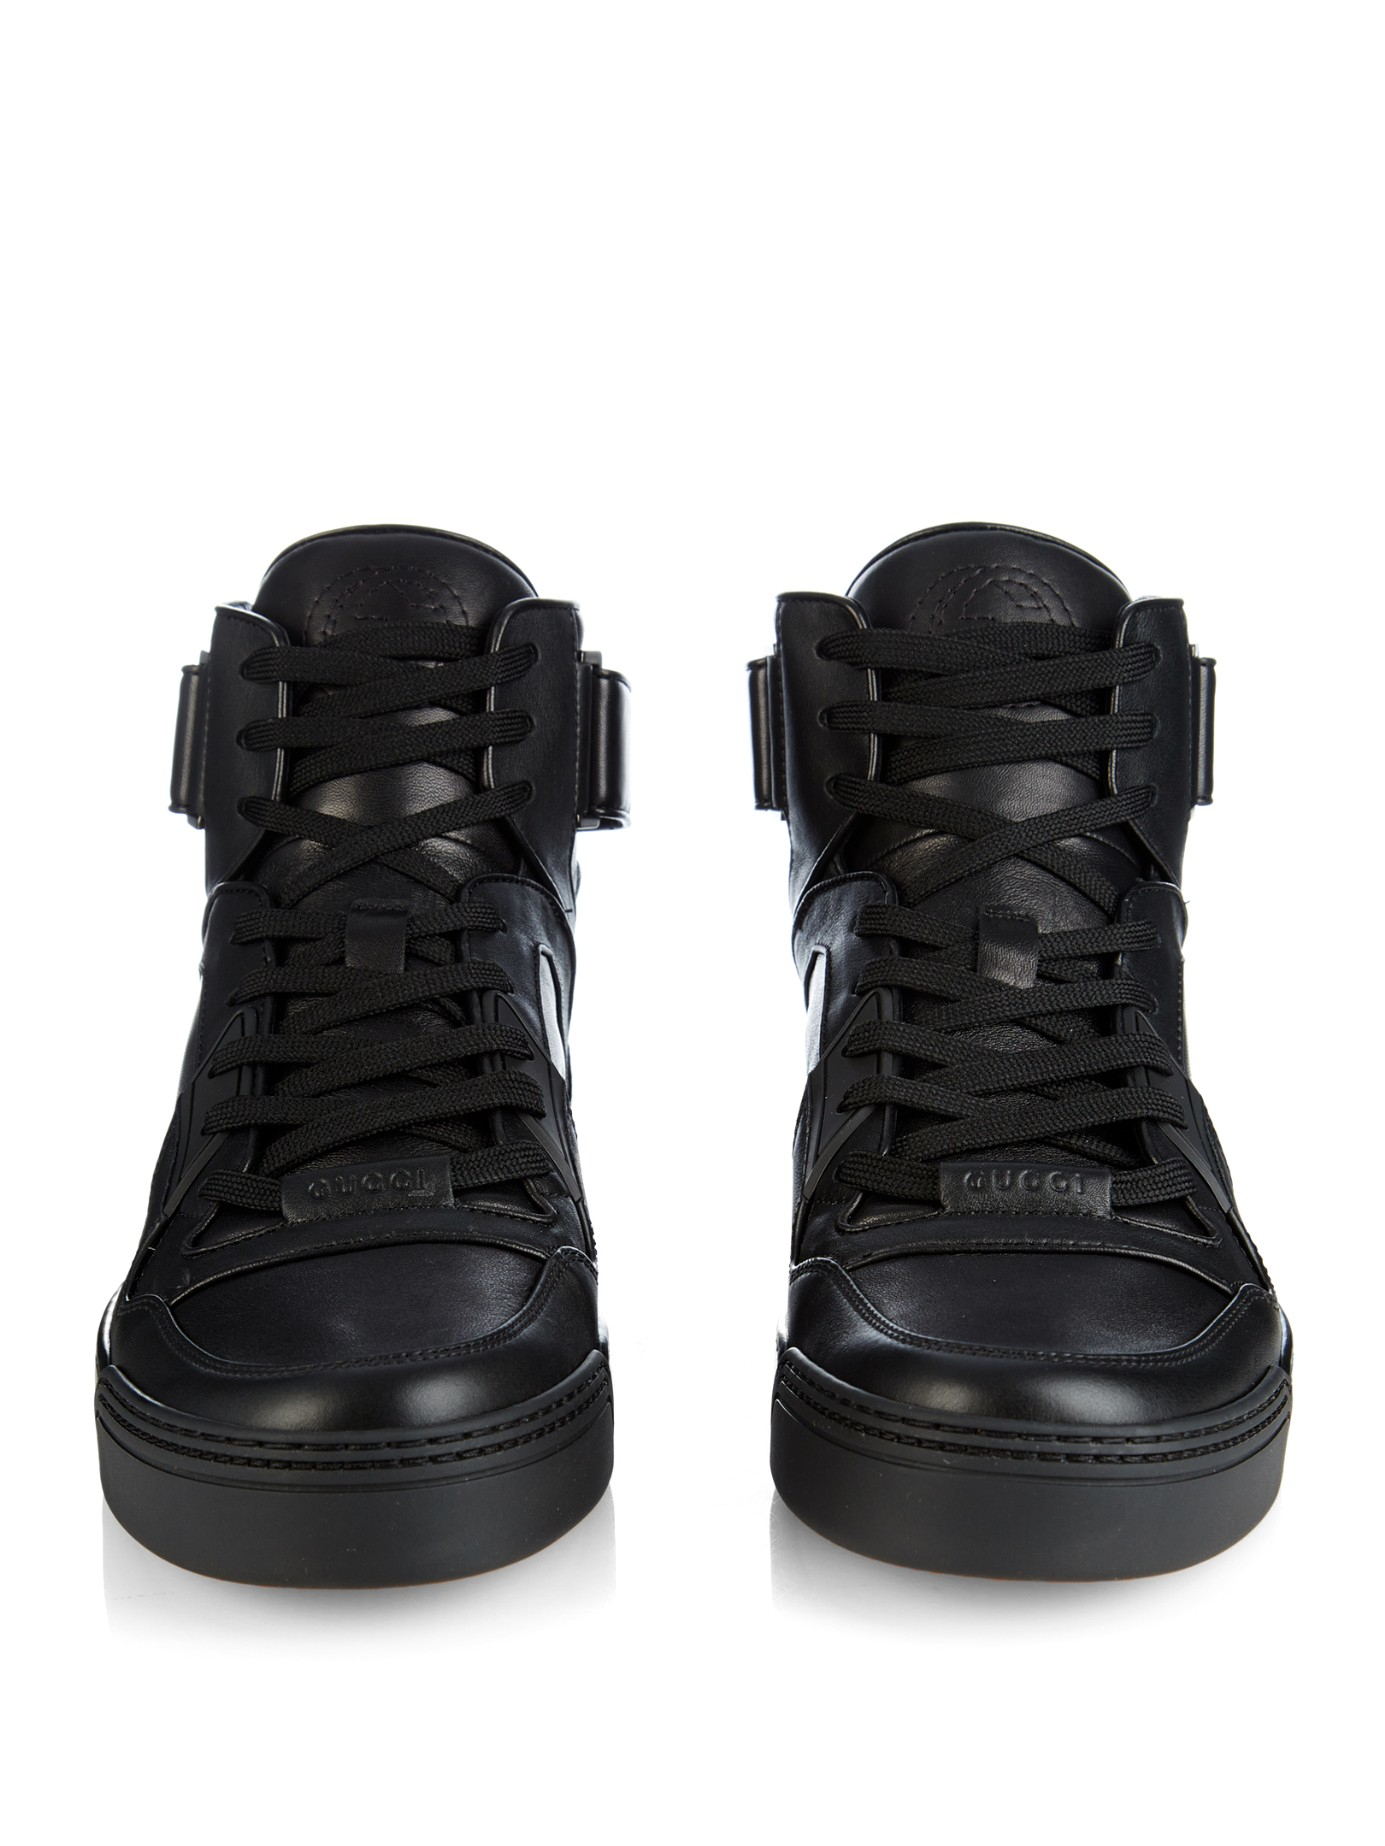 Gucci High-Top Leather Sneakers in Black for Men | Lyst